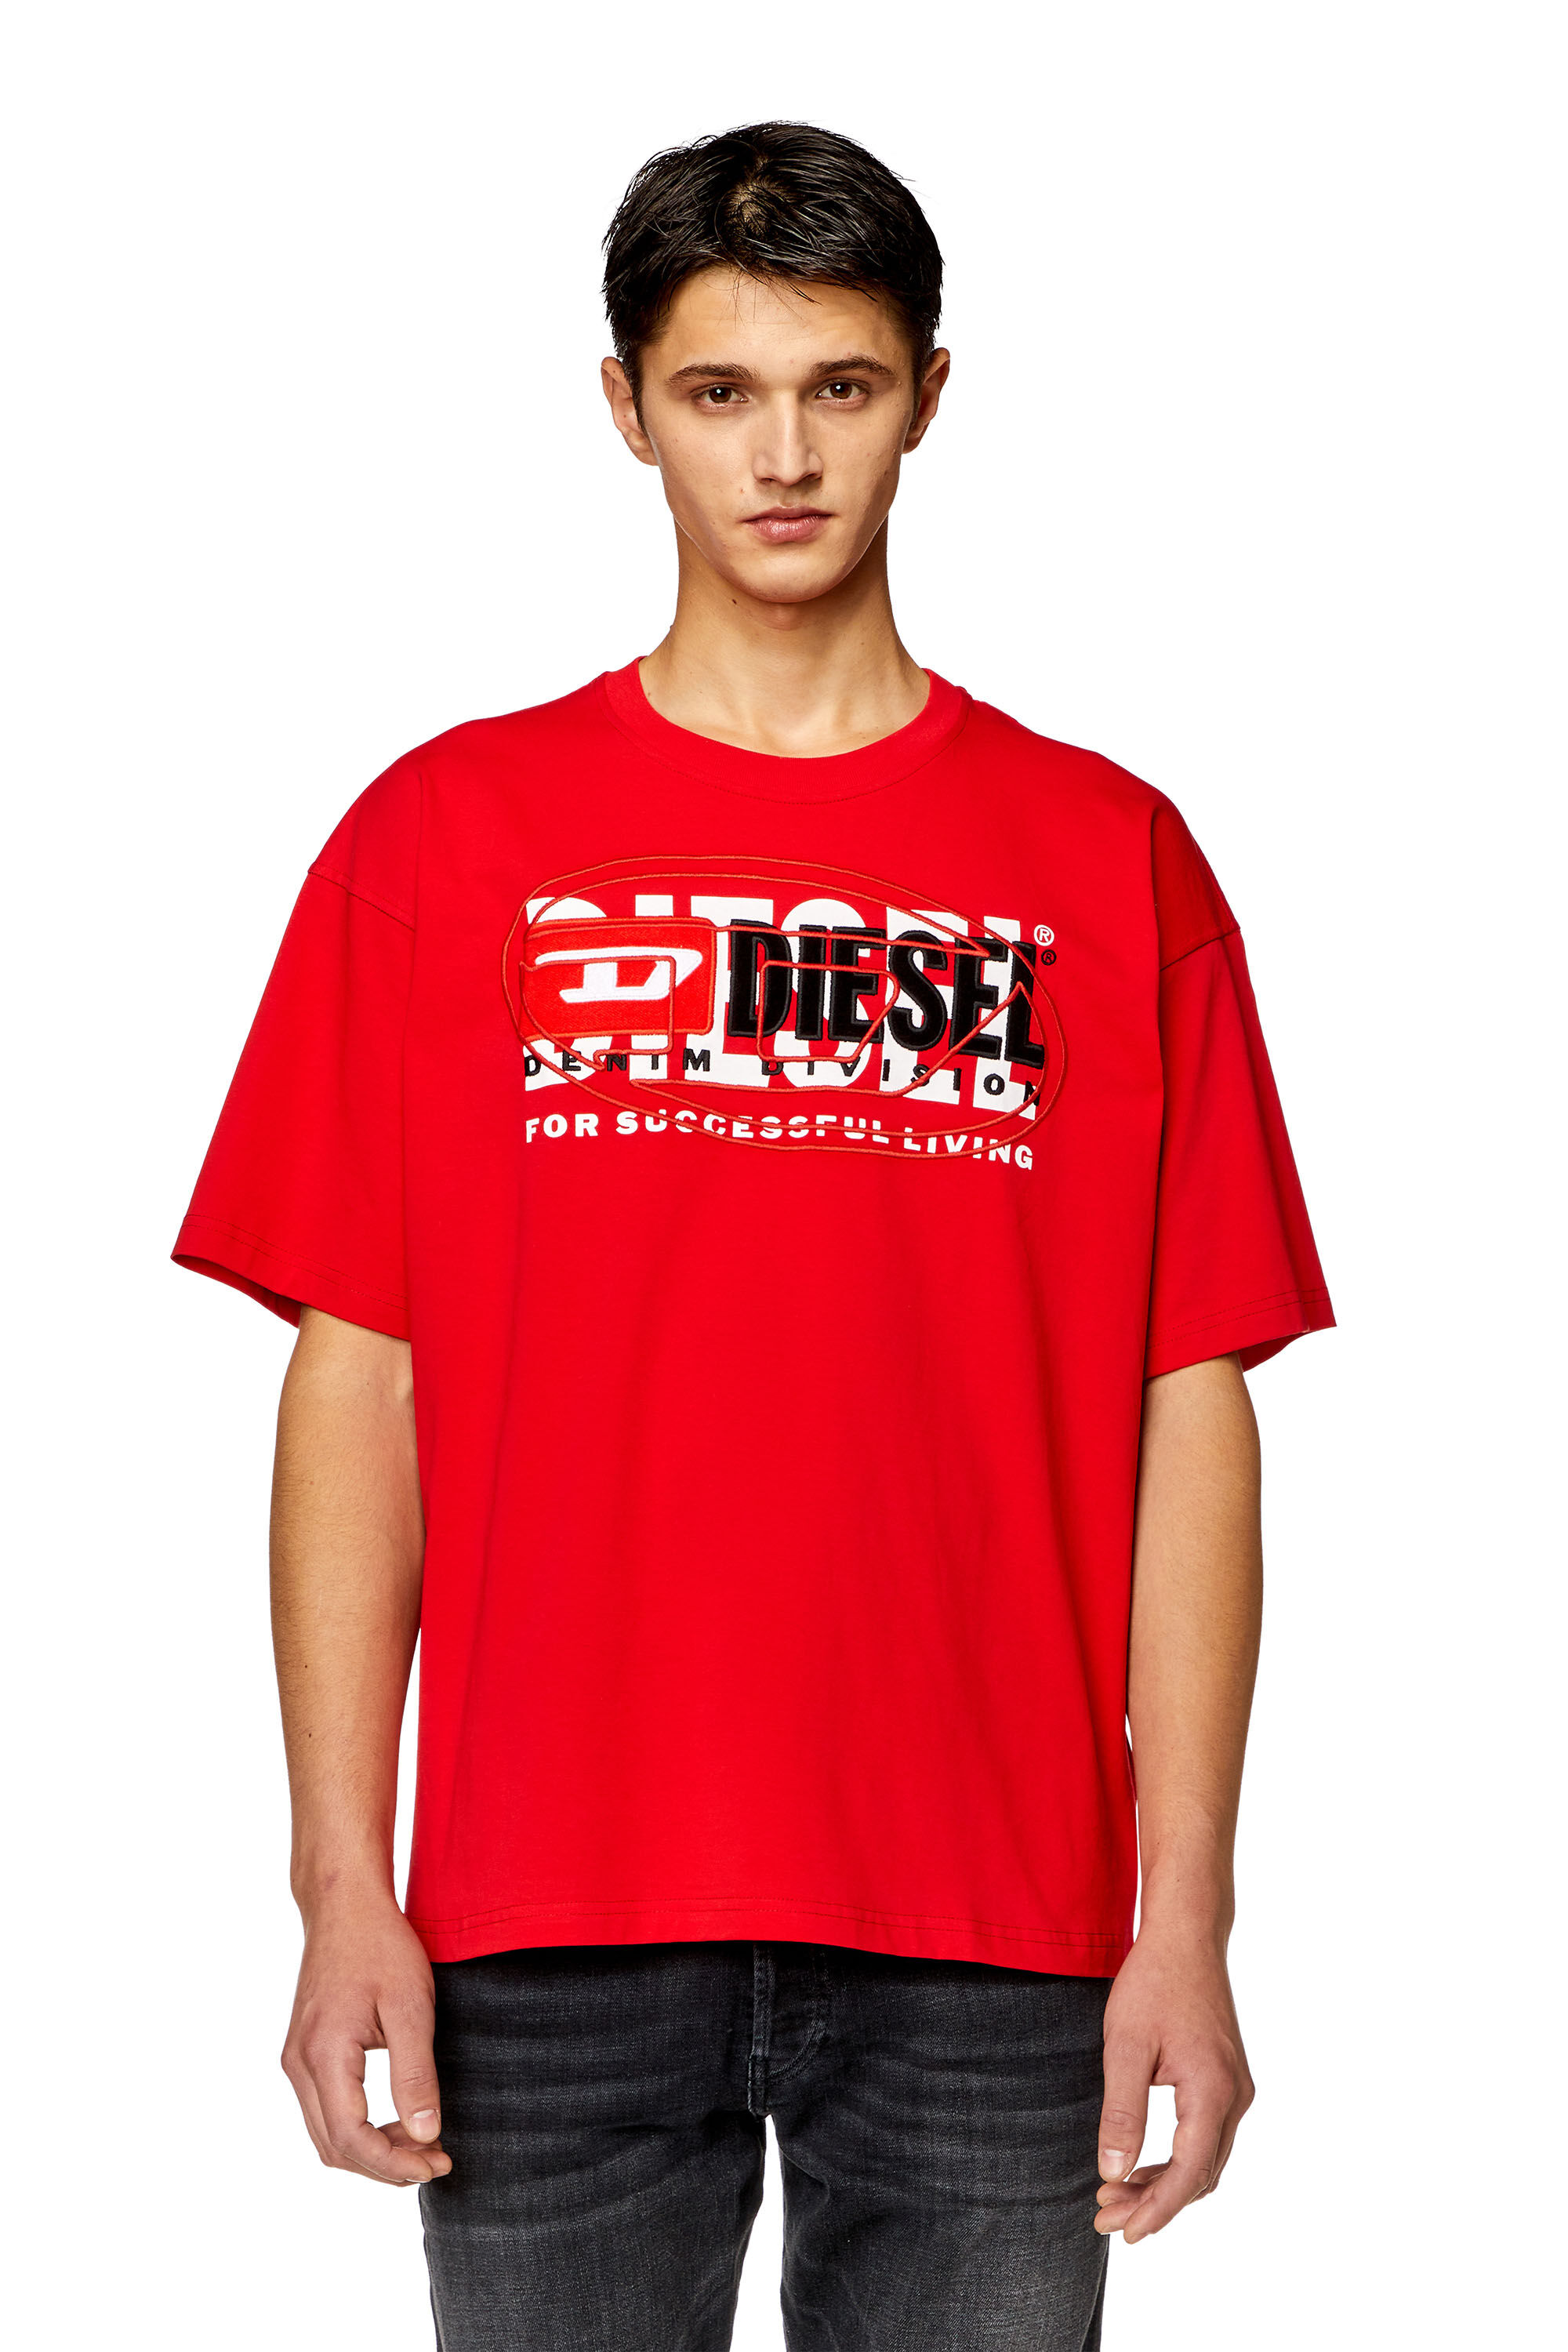 Diesel - T-BOXT, Red - Image 2